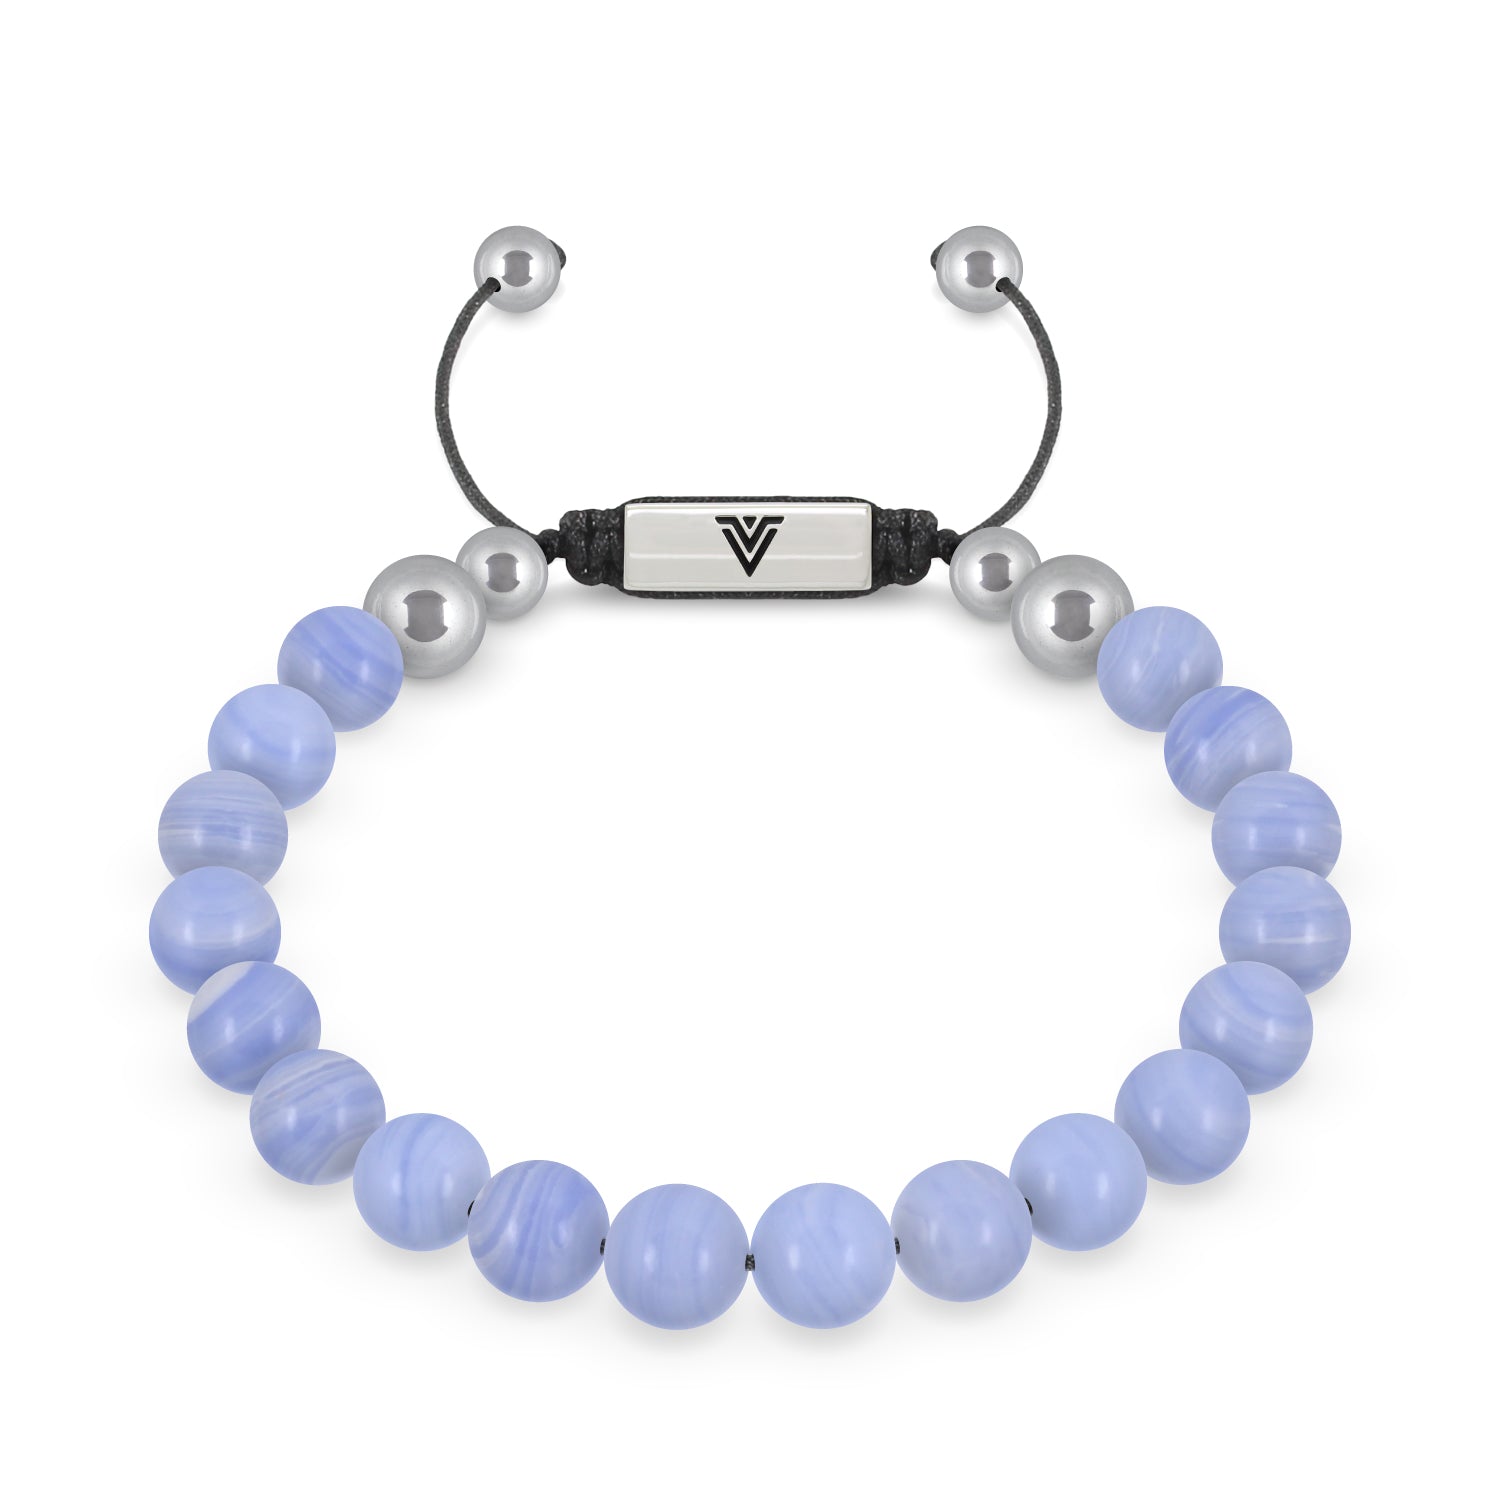 Front view of an 8mm Blue Lace Agate beaded shamballa bracelet with silver stainless steel logo bead made by Voltlin